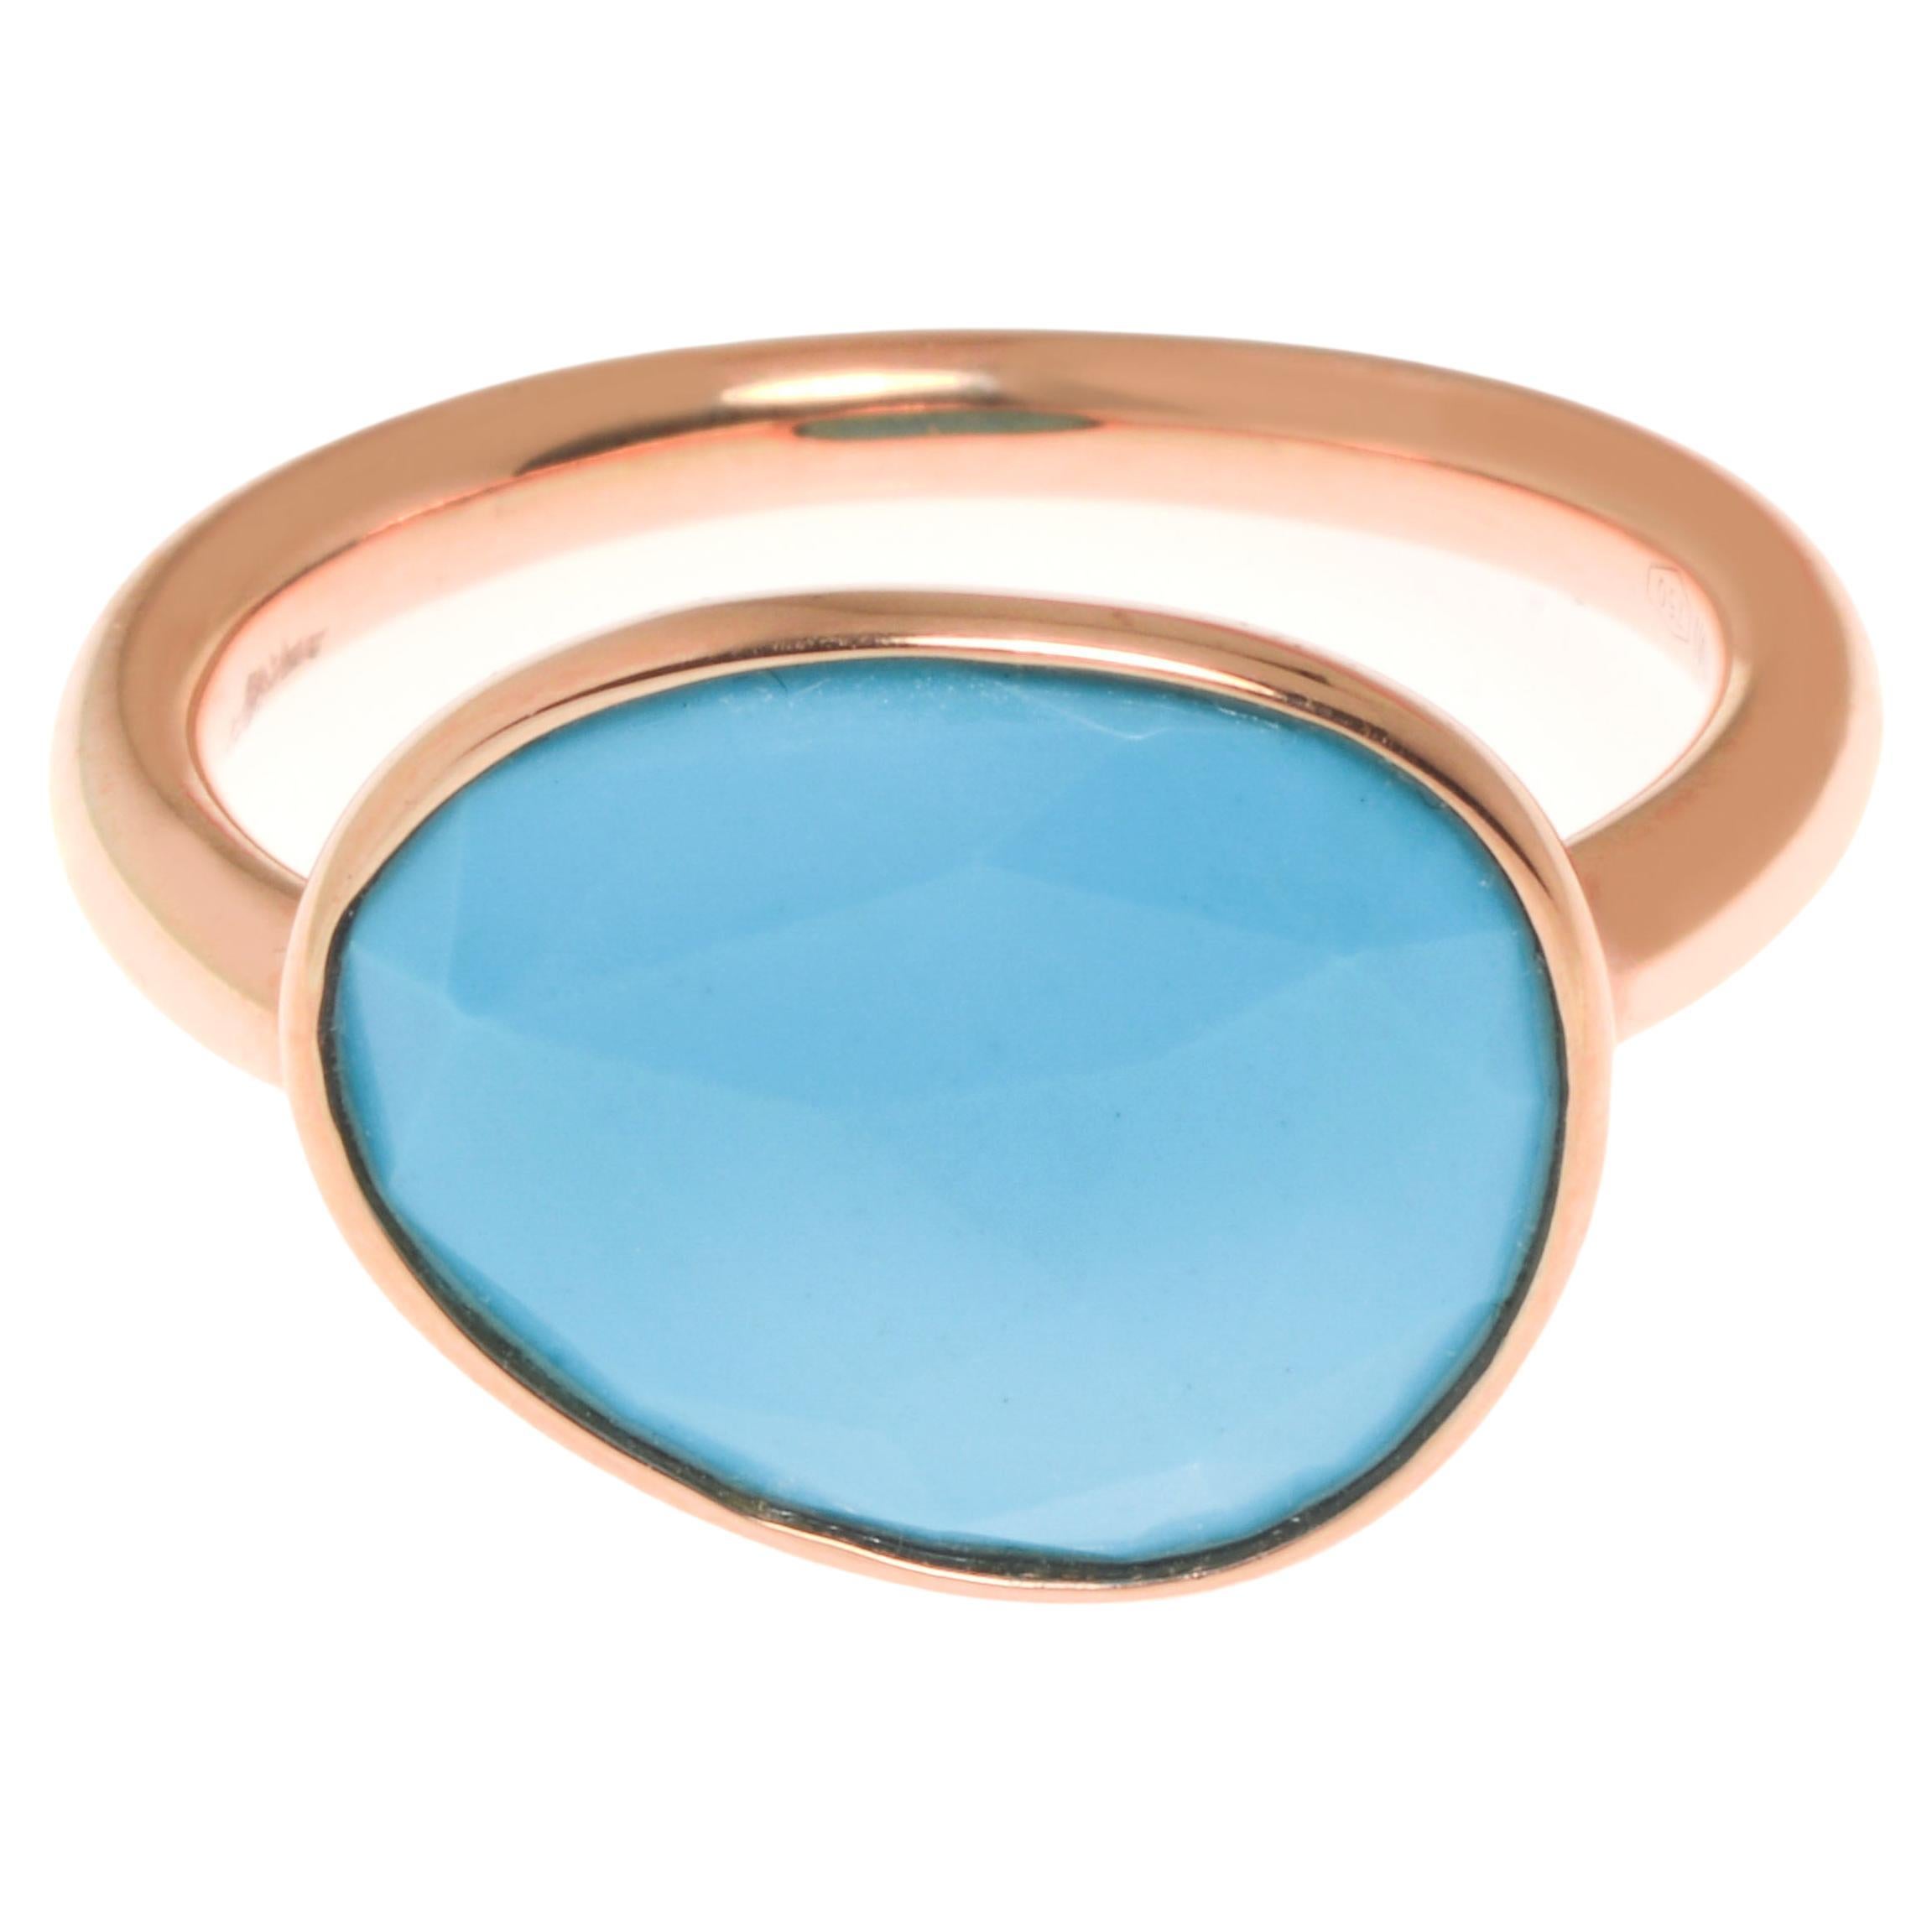 Mimi Milano 18K Rose Gold, Turquoise Cocktail Ring sz 7.5 For Sale